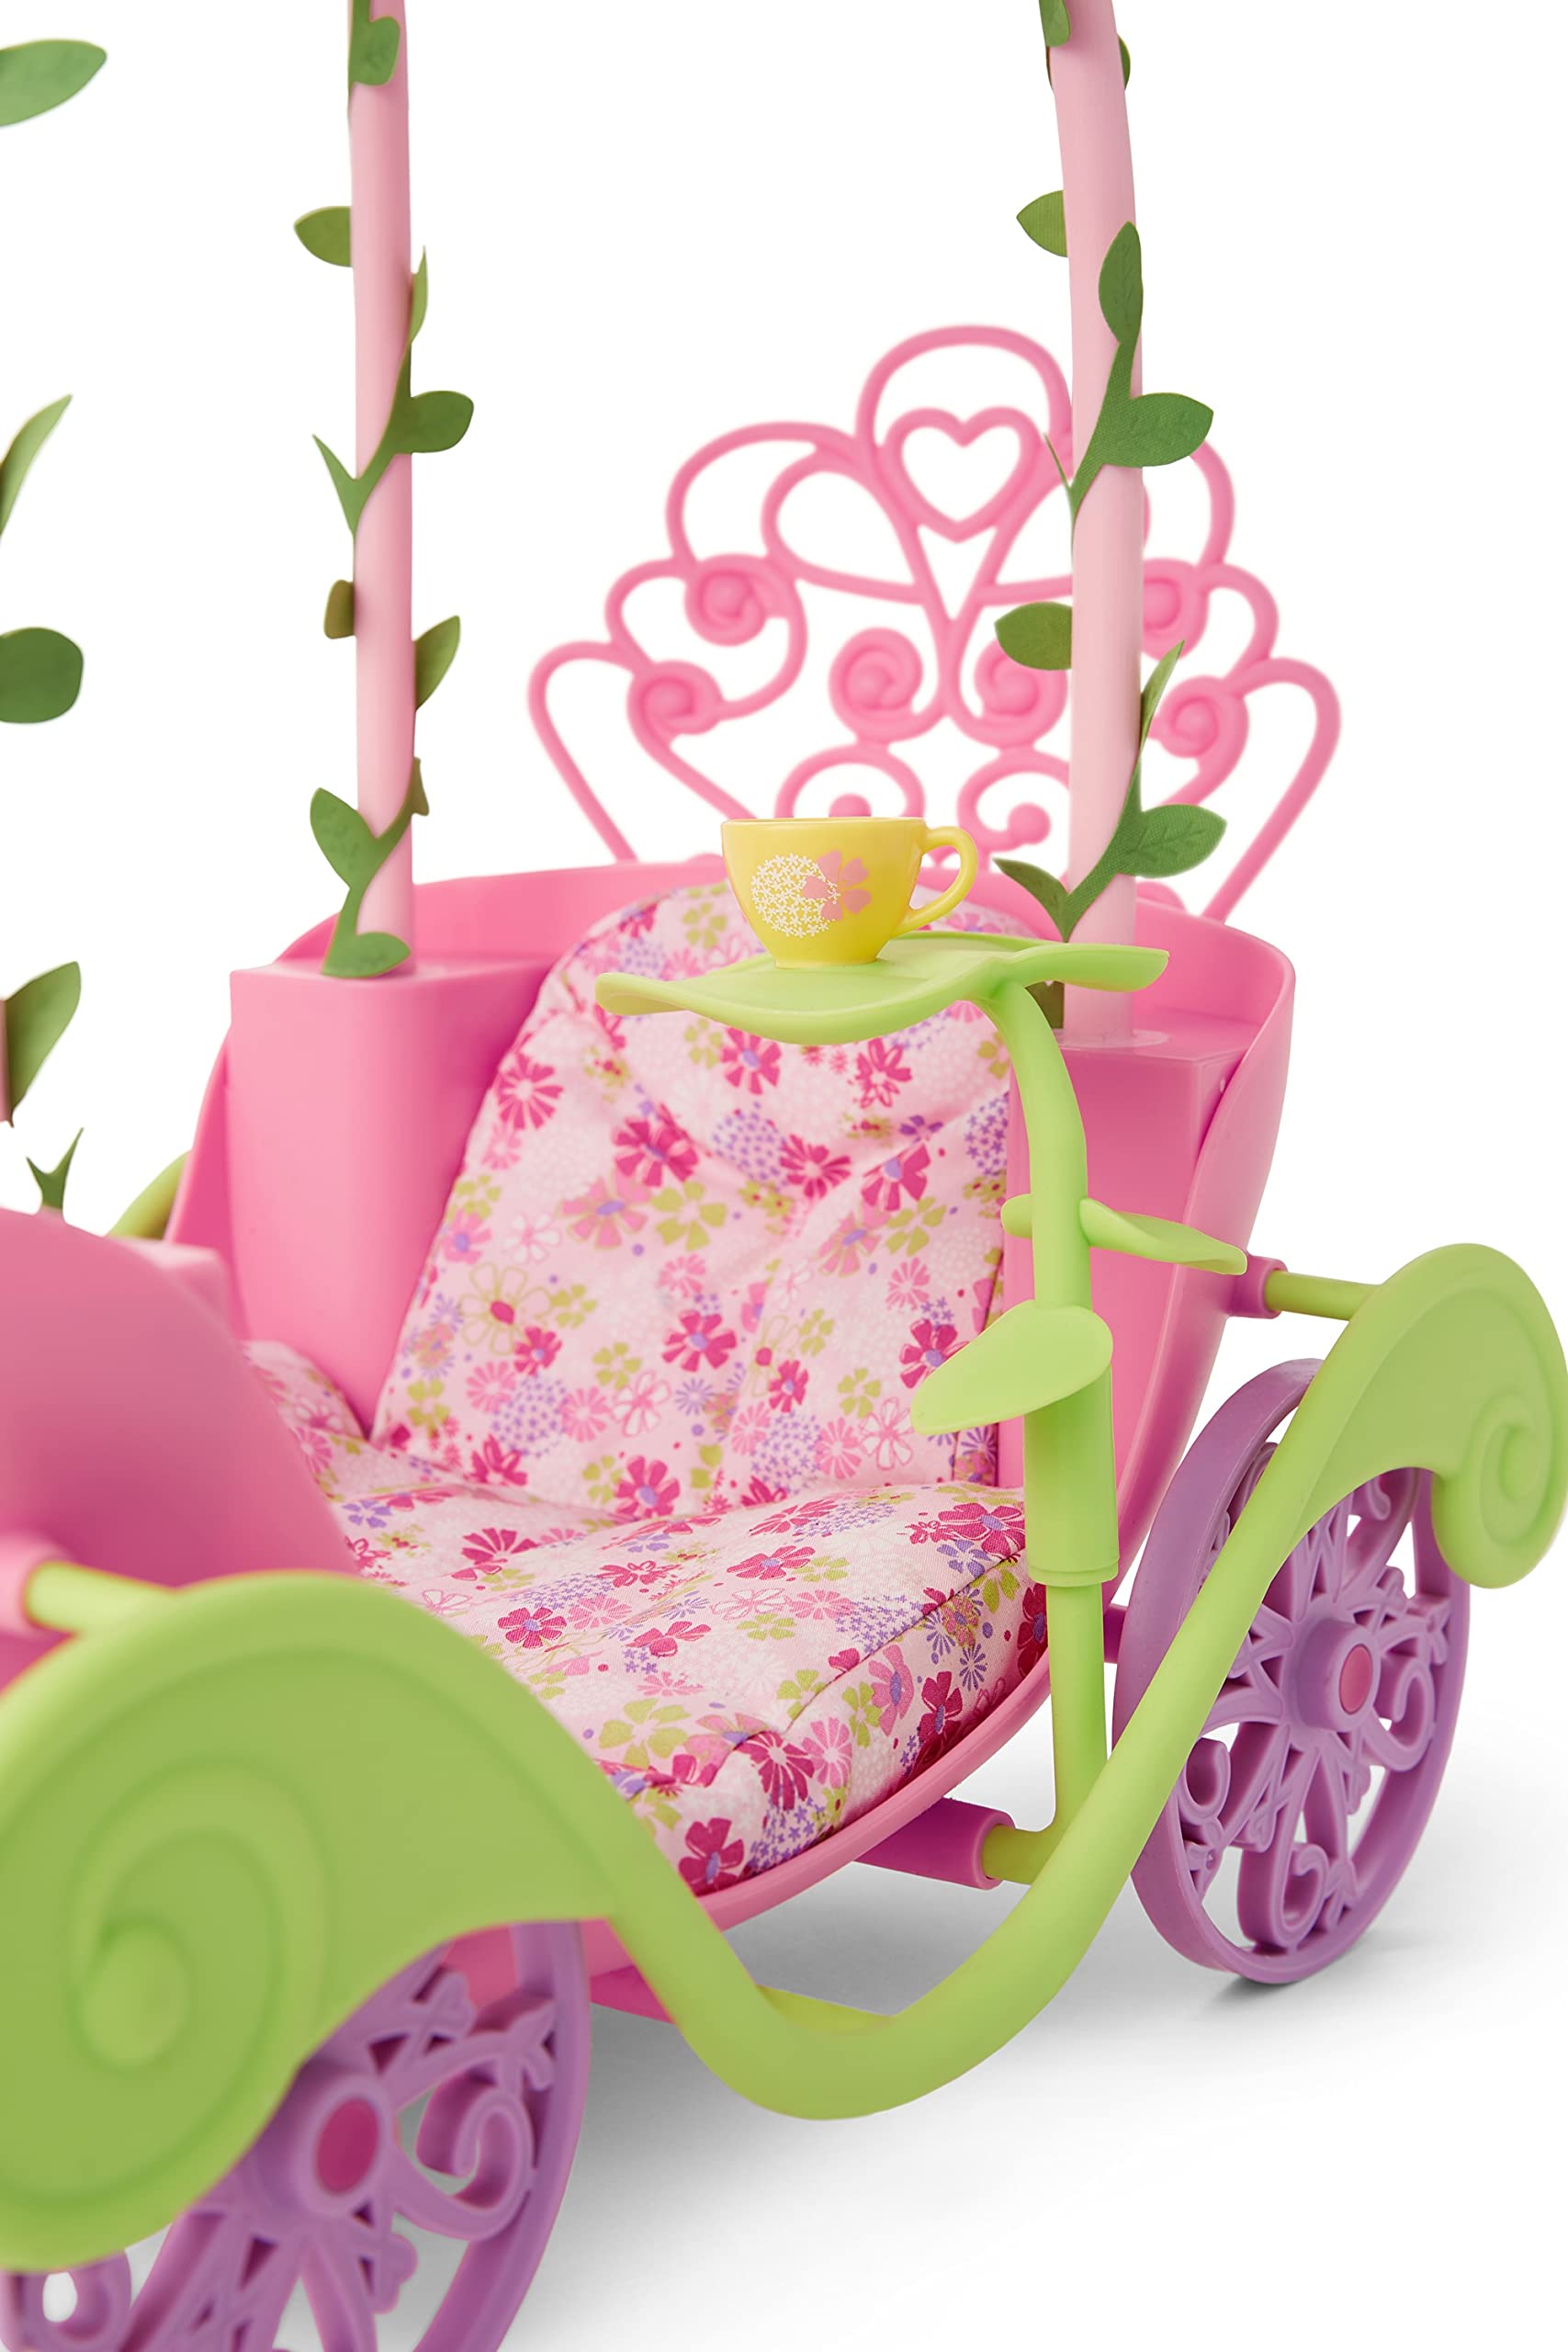 American Girl WellieWishers Magical Garden Carriage for 14.5